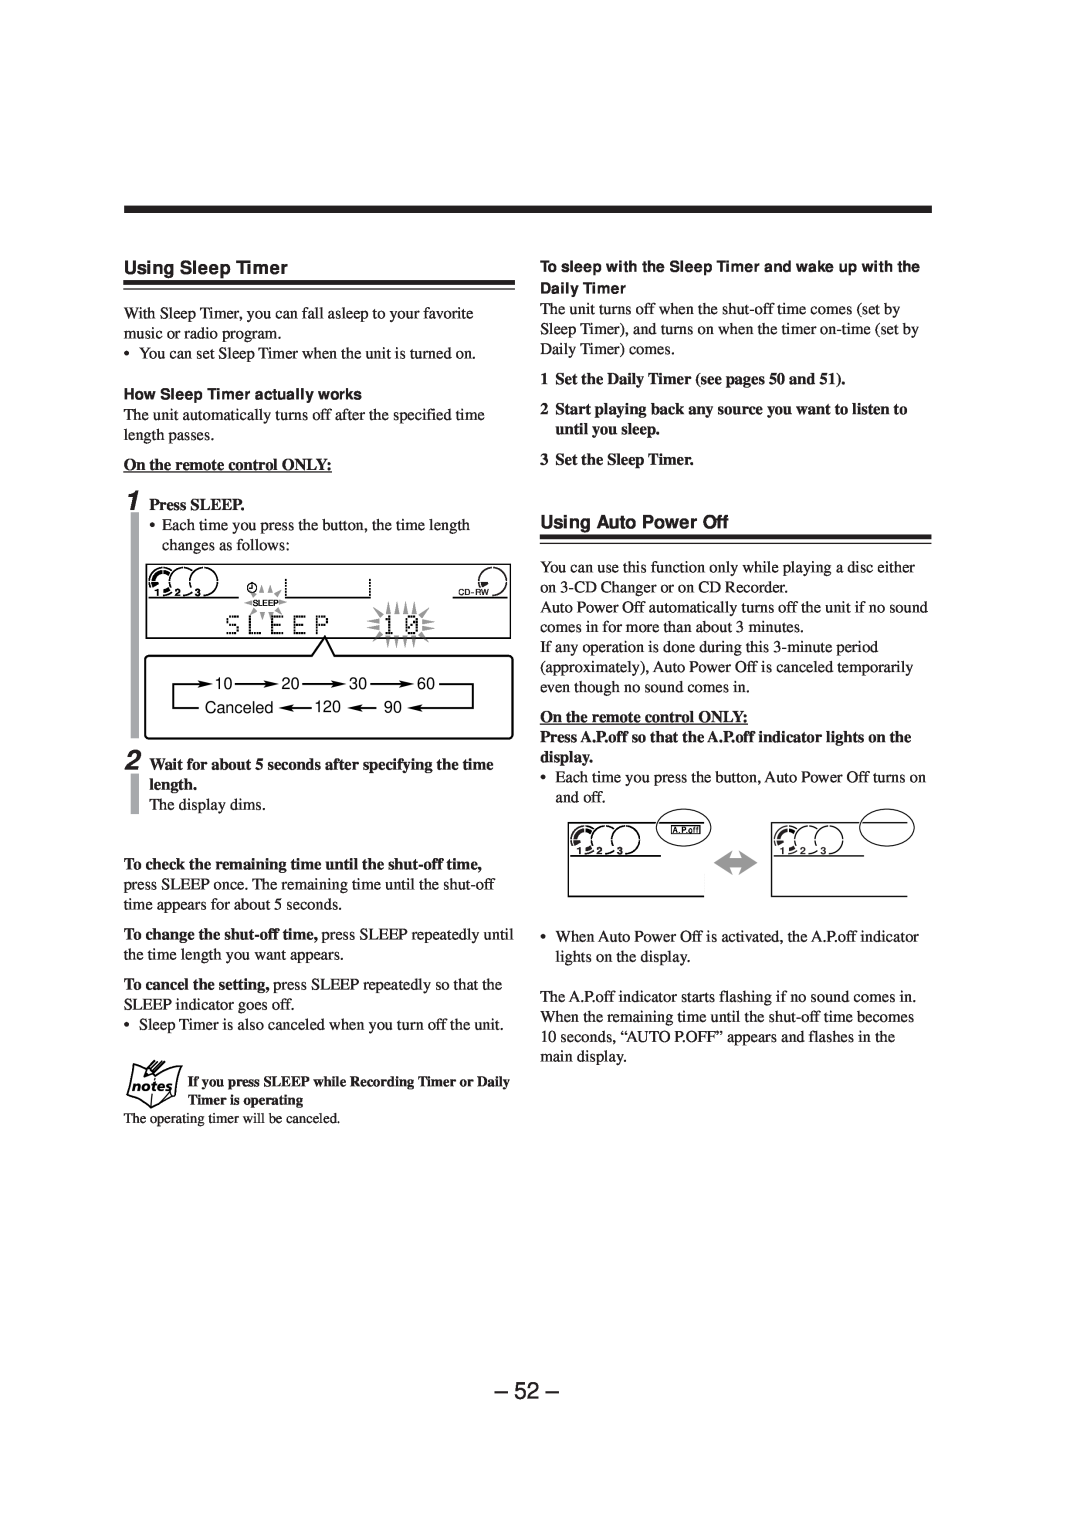 JVC CA-NXCDR7R, LVT0749-003A manual Using Sleep Timer, Using Auto Power Off, How Sleep Timer actually works 